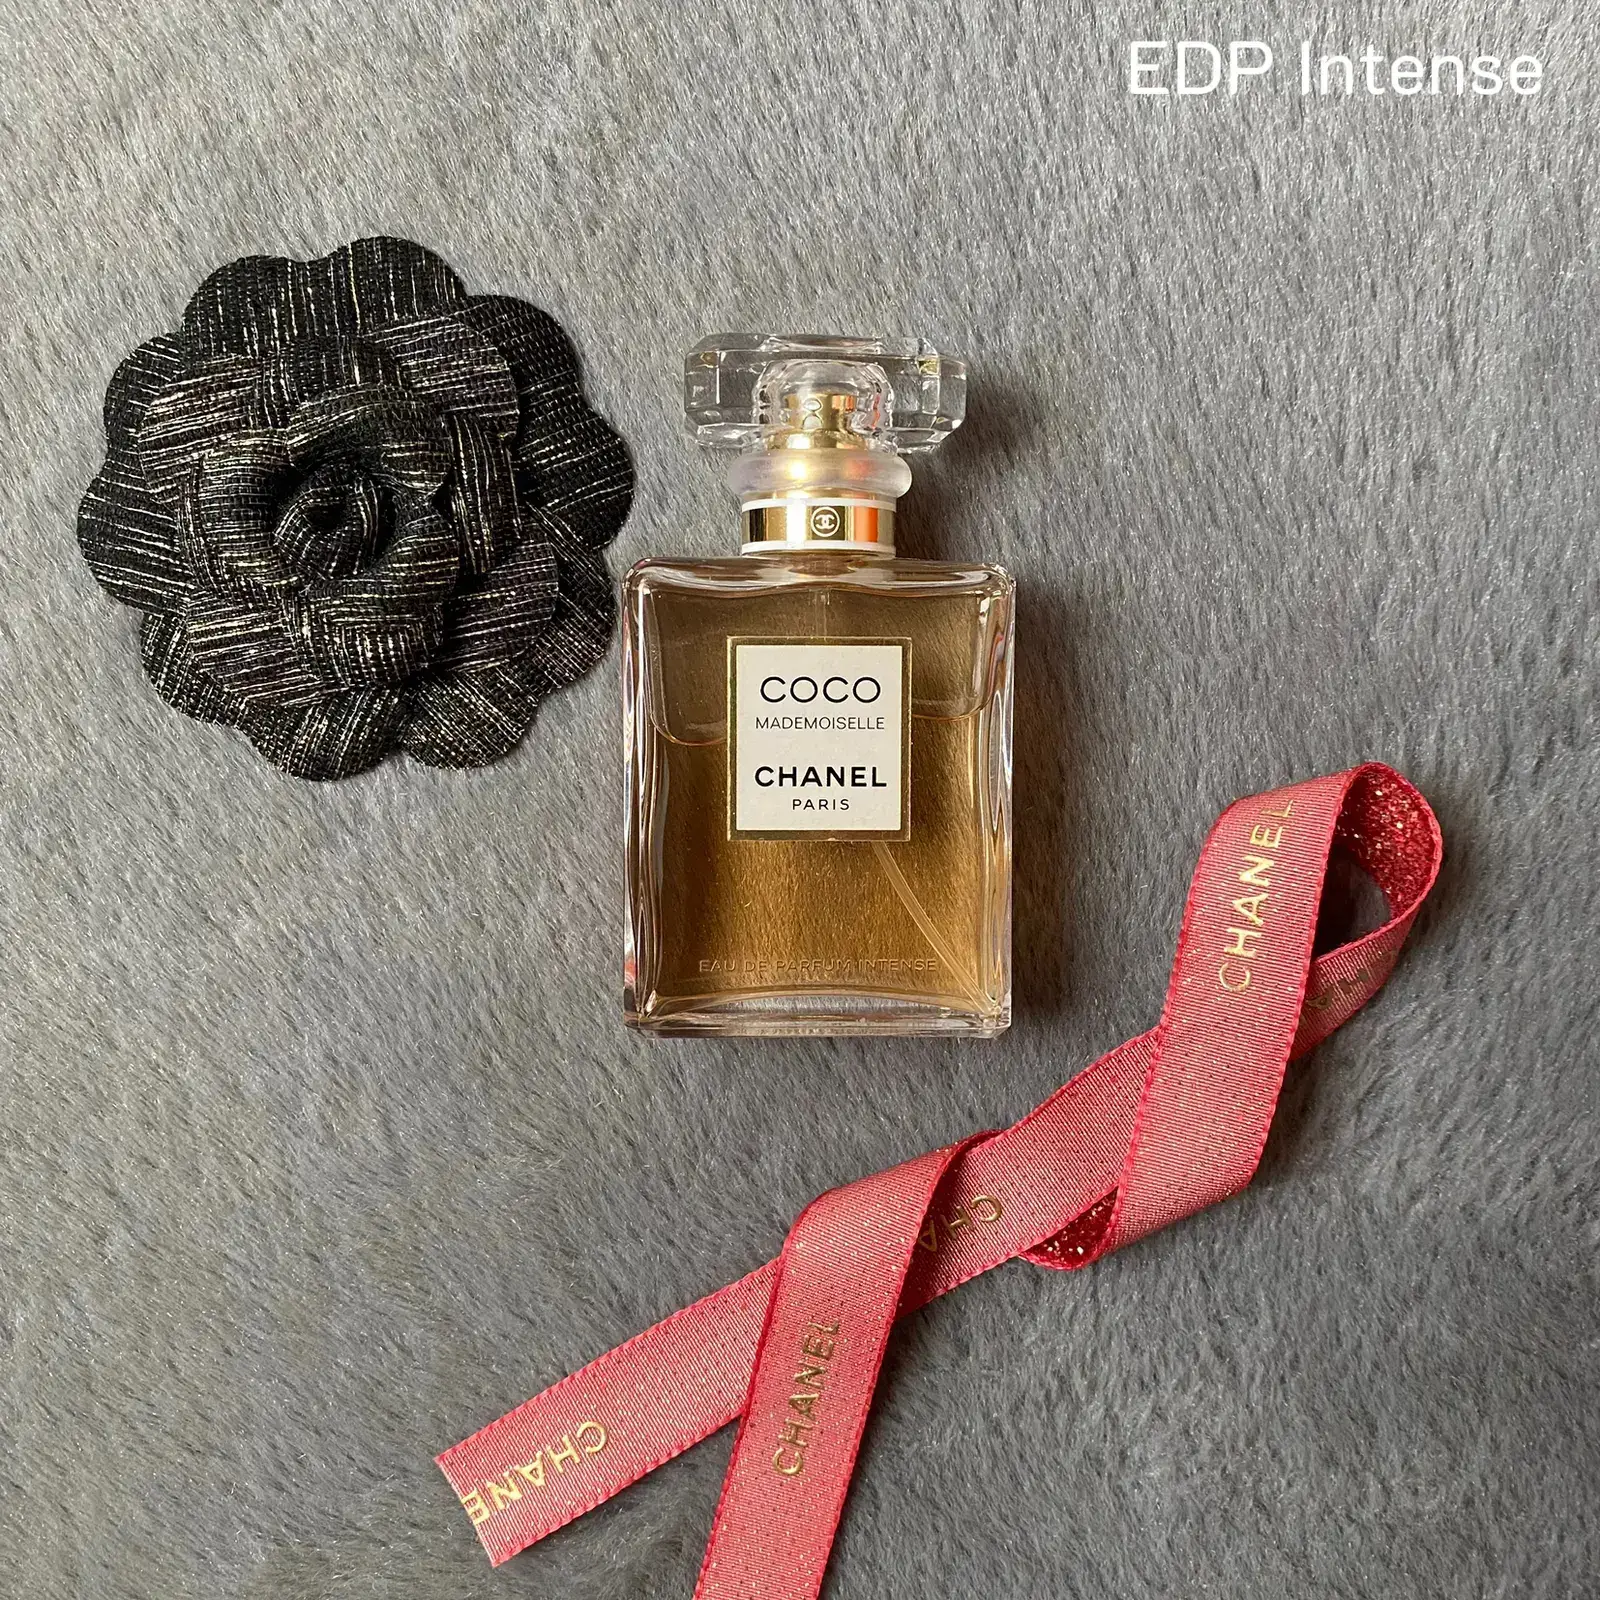 Two CHANEL Mademoiselle. What's the difference in smell?😜⁉️, Gallery  posted by LittlecatReview